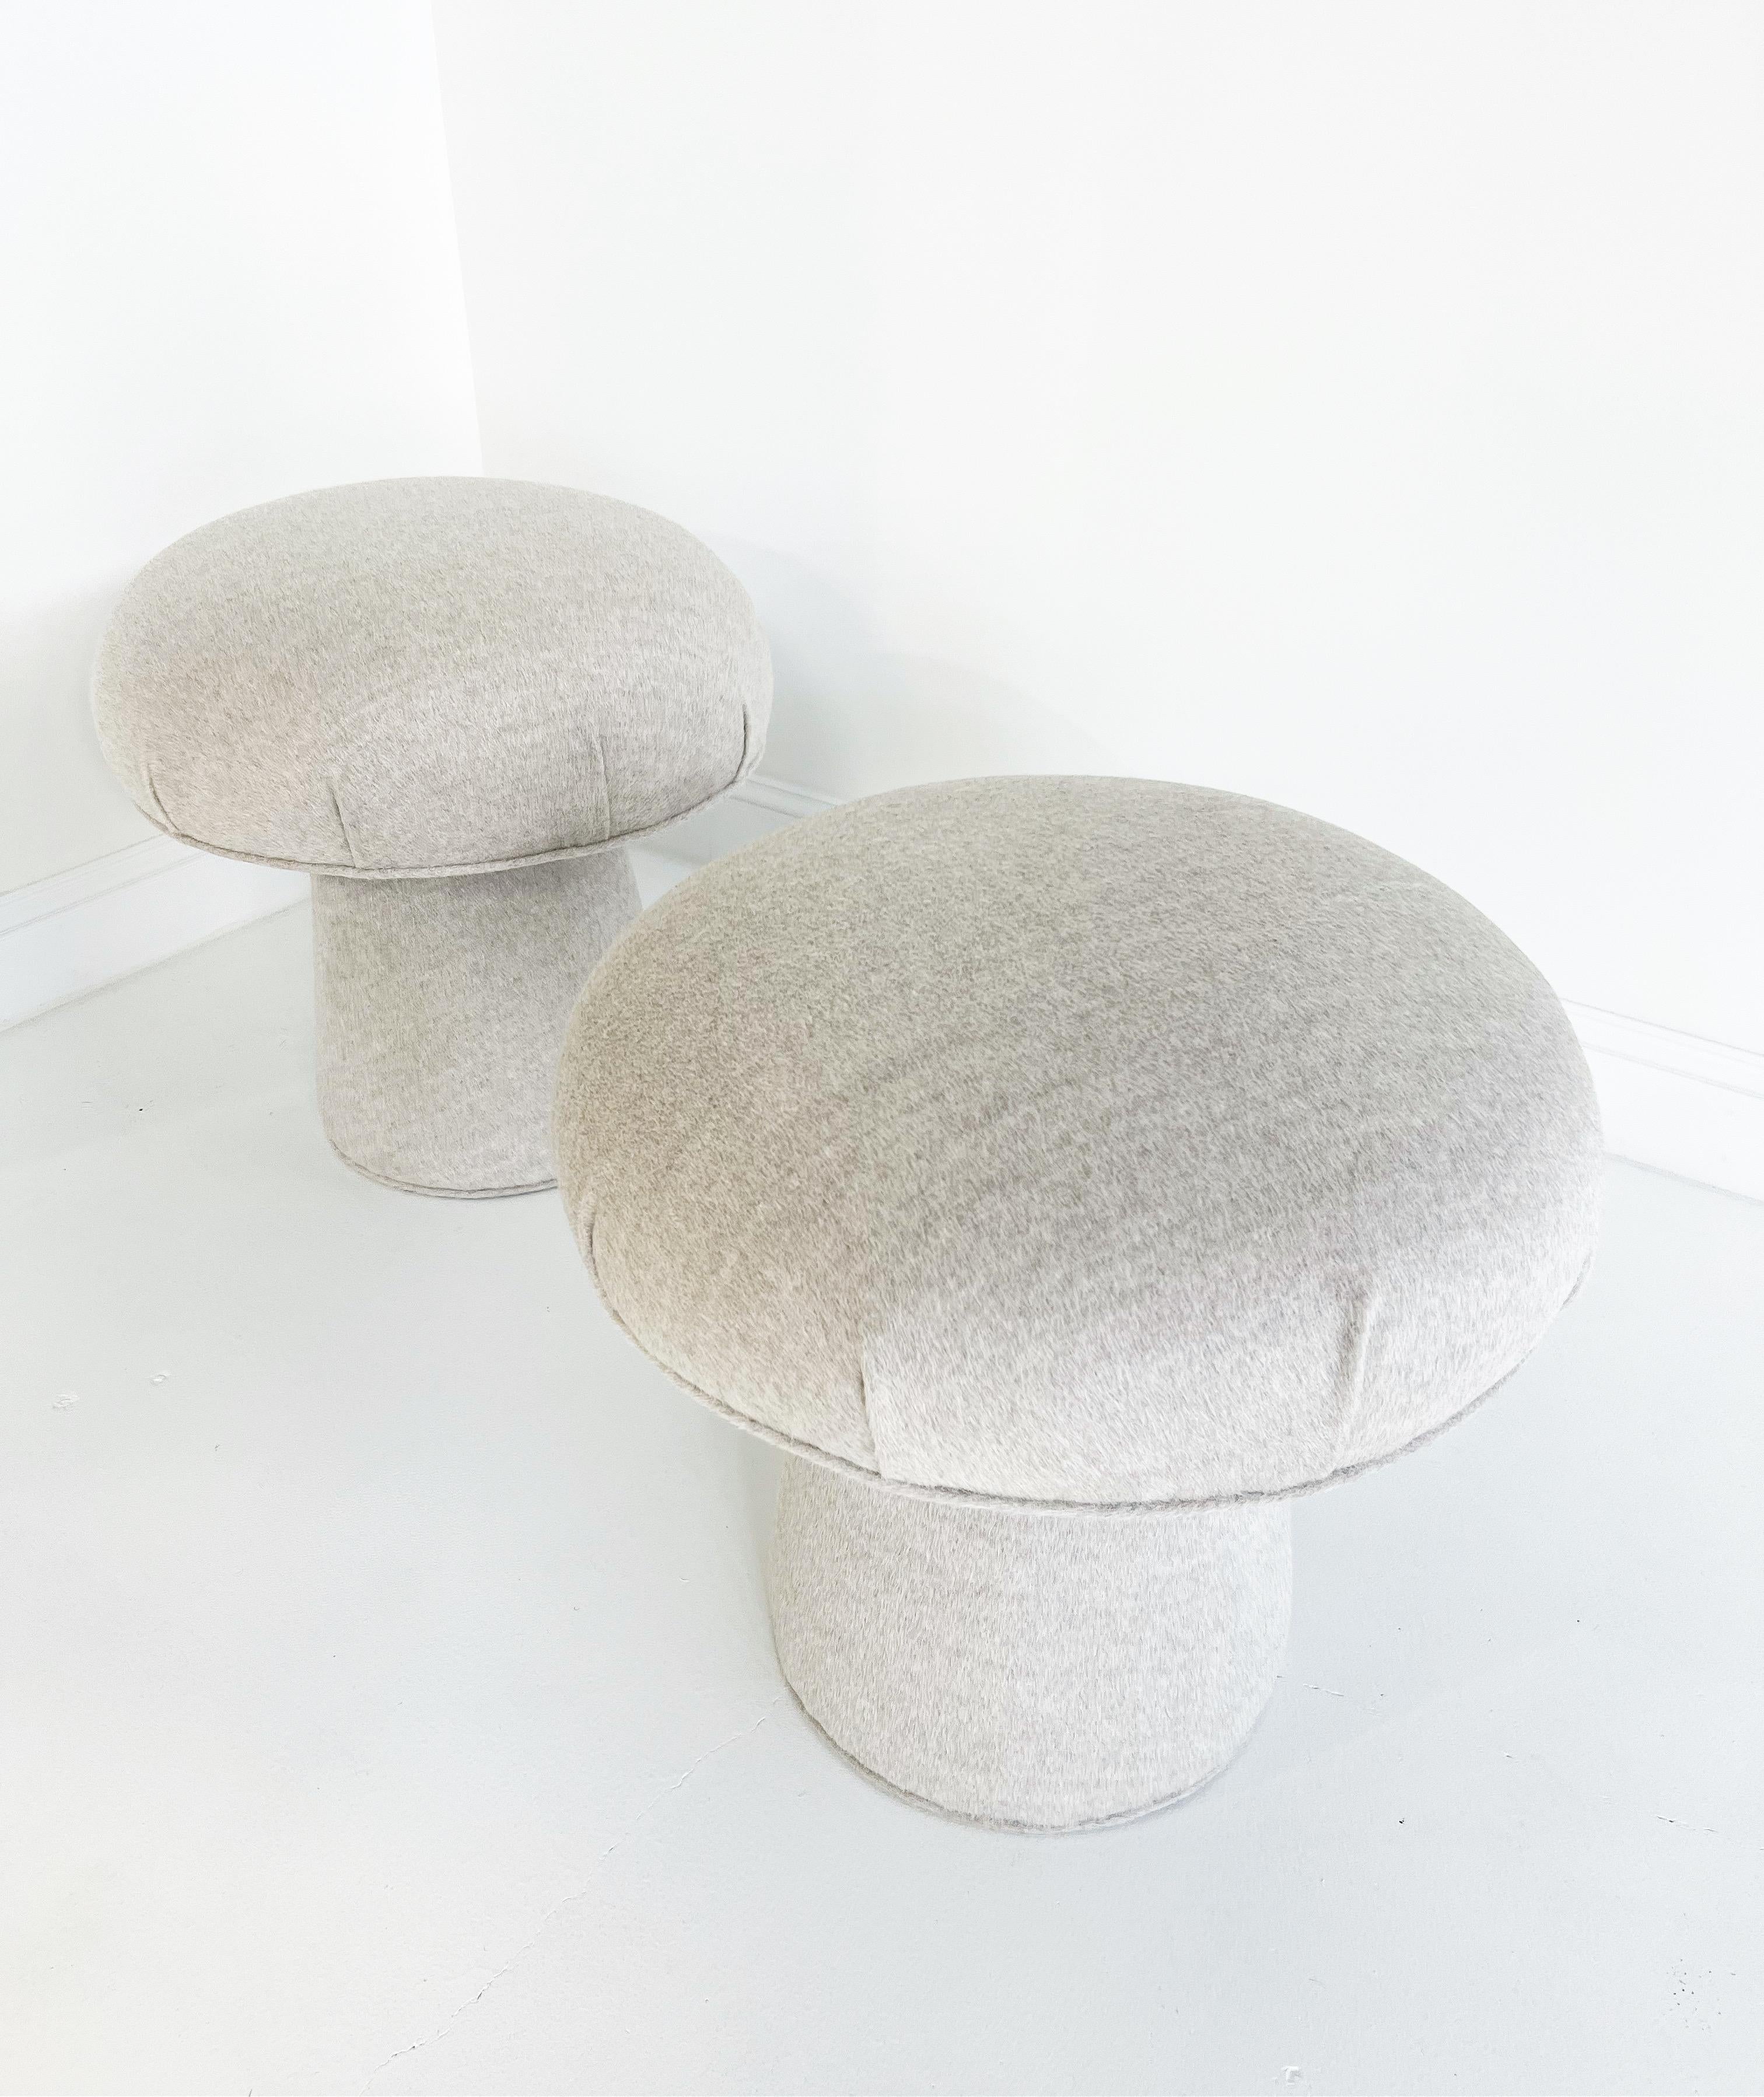 This Forsyth mushroom pouf ottoman was created and designed by the Forsyth design team. Each ottoman is handcrafted in Saint Louis. A cute decorative piece for any room adding natural texture and a bit of whimsy. The perfect ottoman or extra seat.